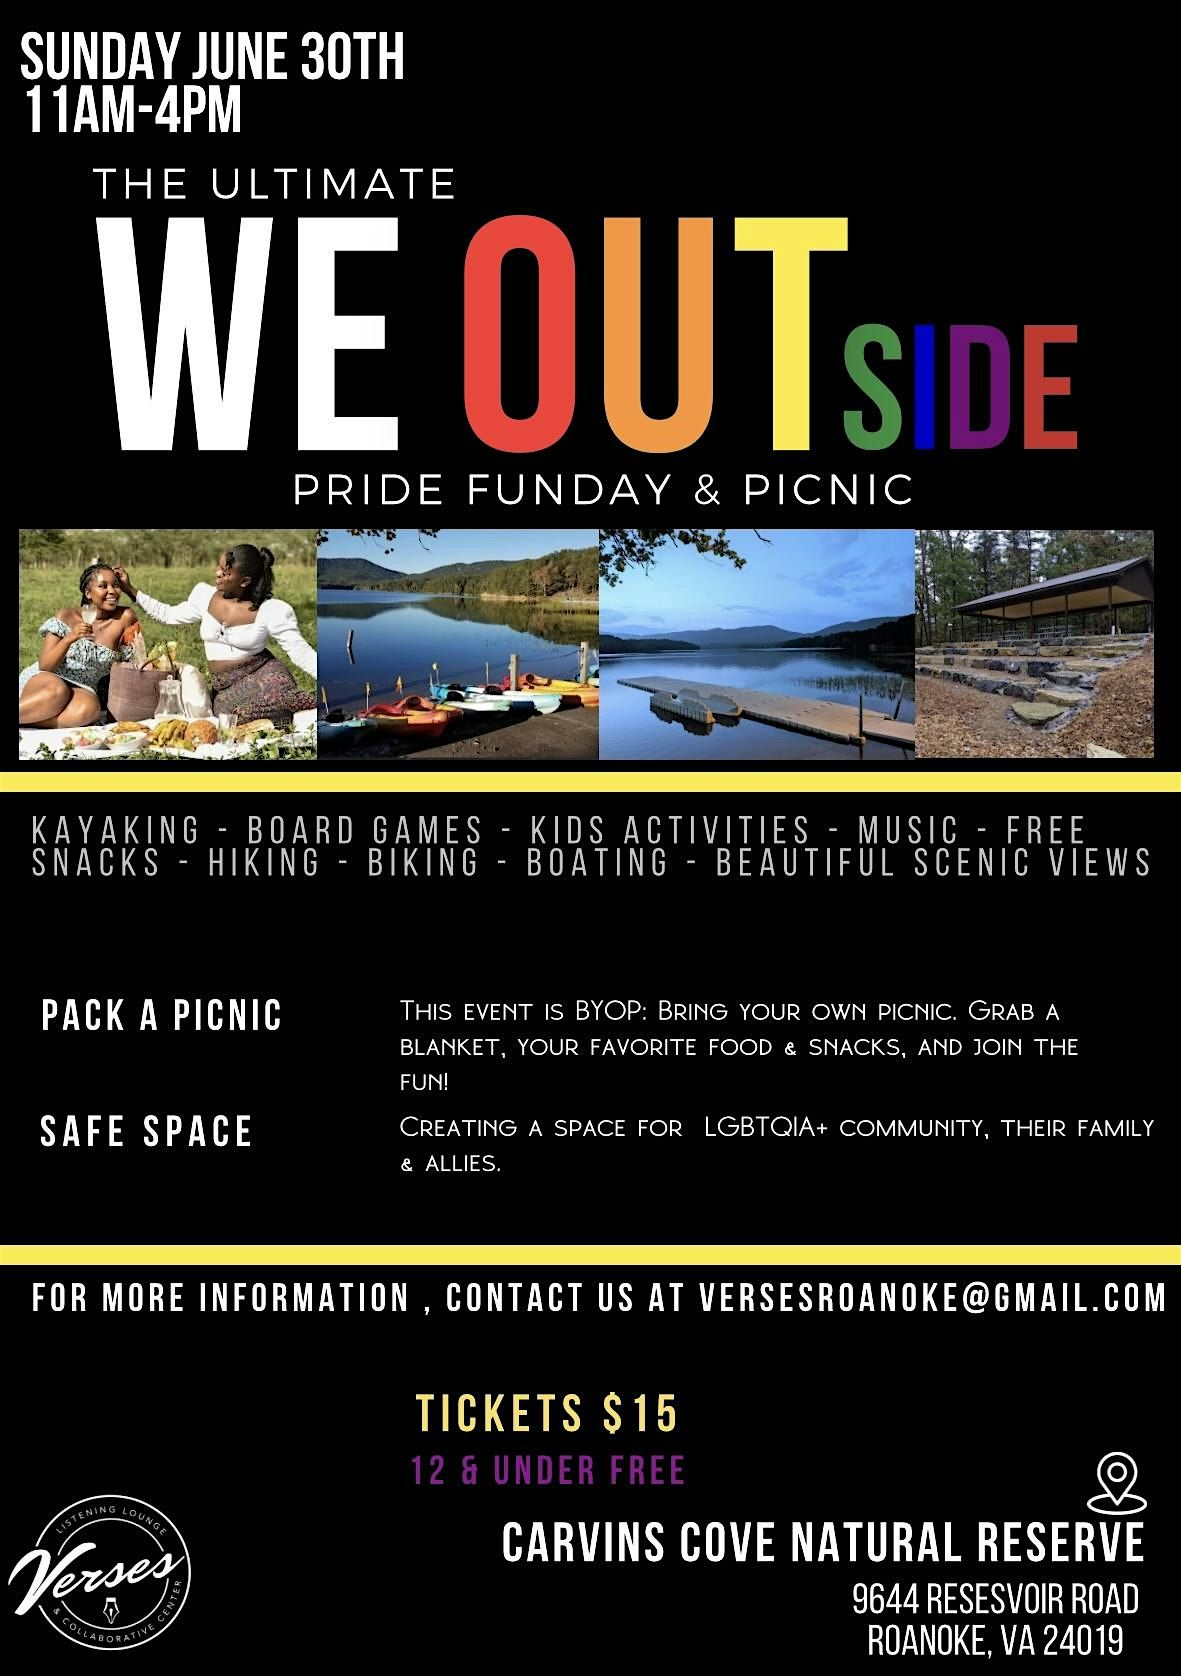 The Ultimate We OUTside Pride Funday & Picnic